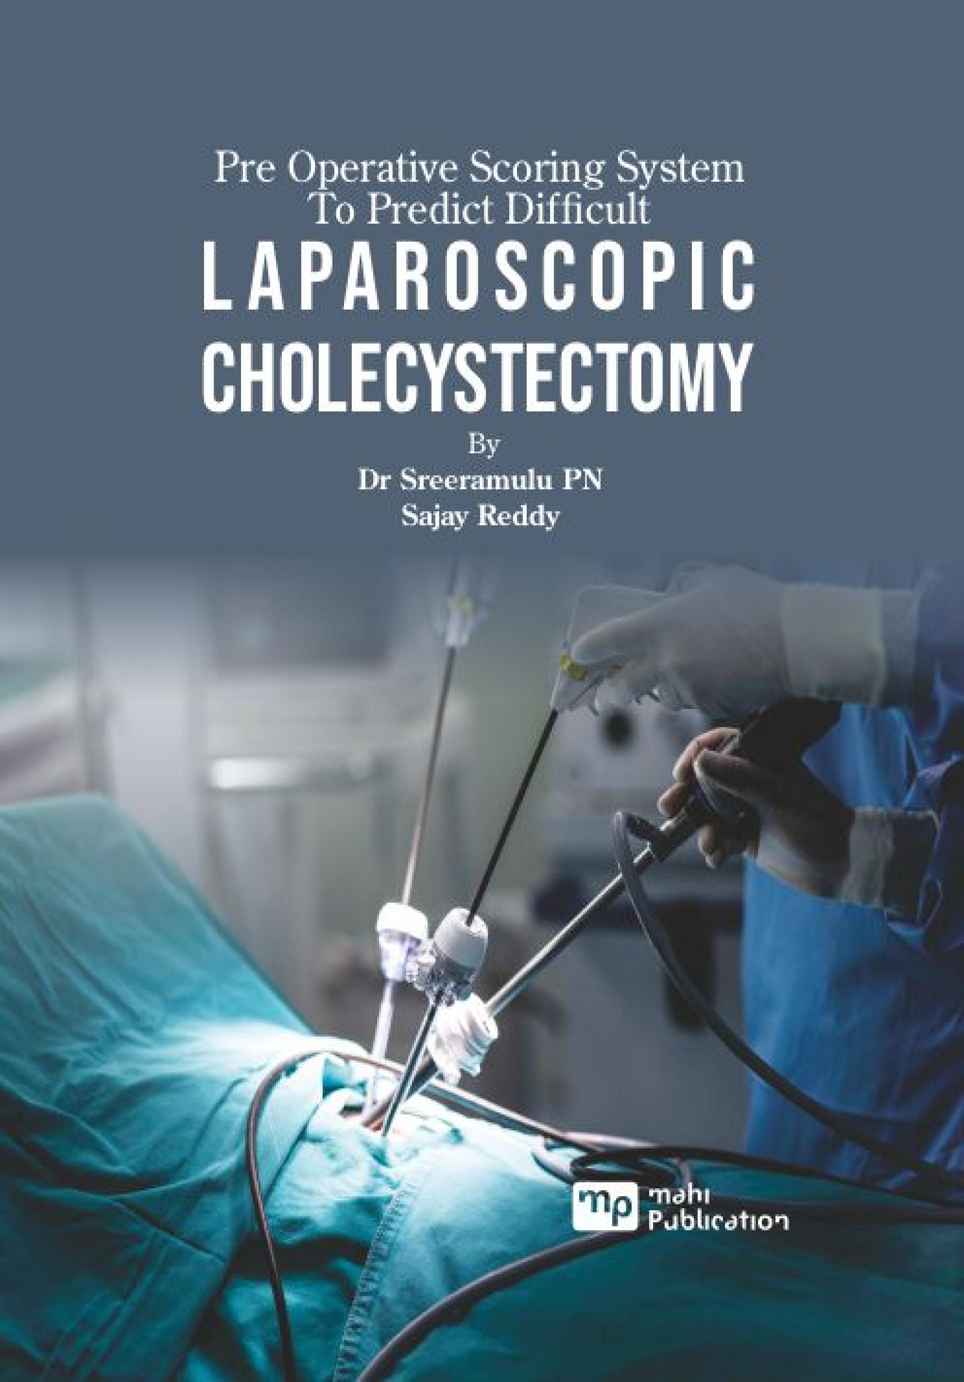 Pre Operative Scoring System To Predict Difficult Laparoscopic Cholecystectomy